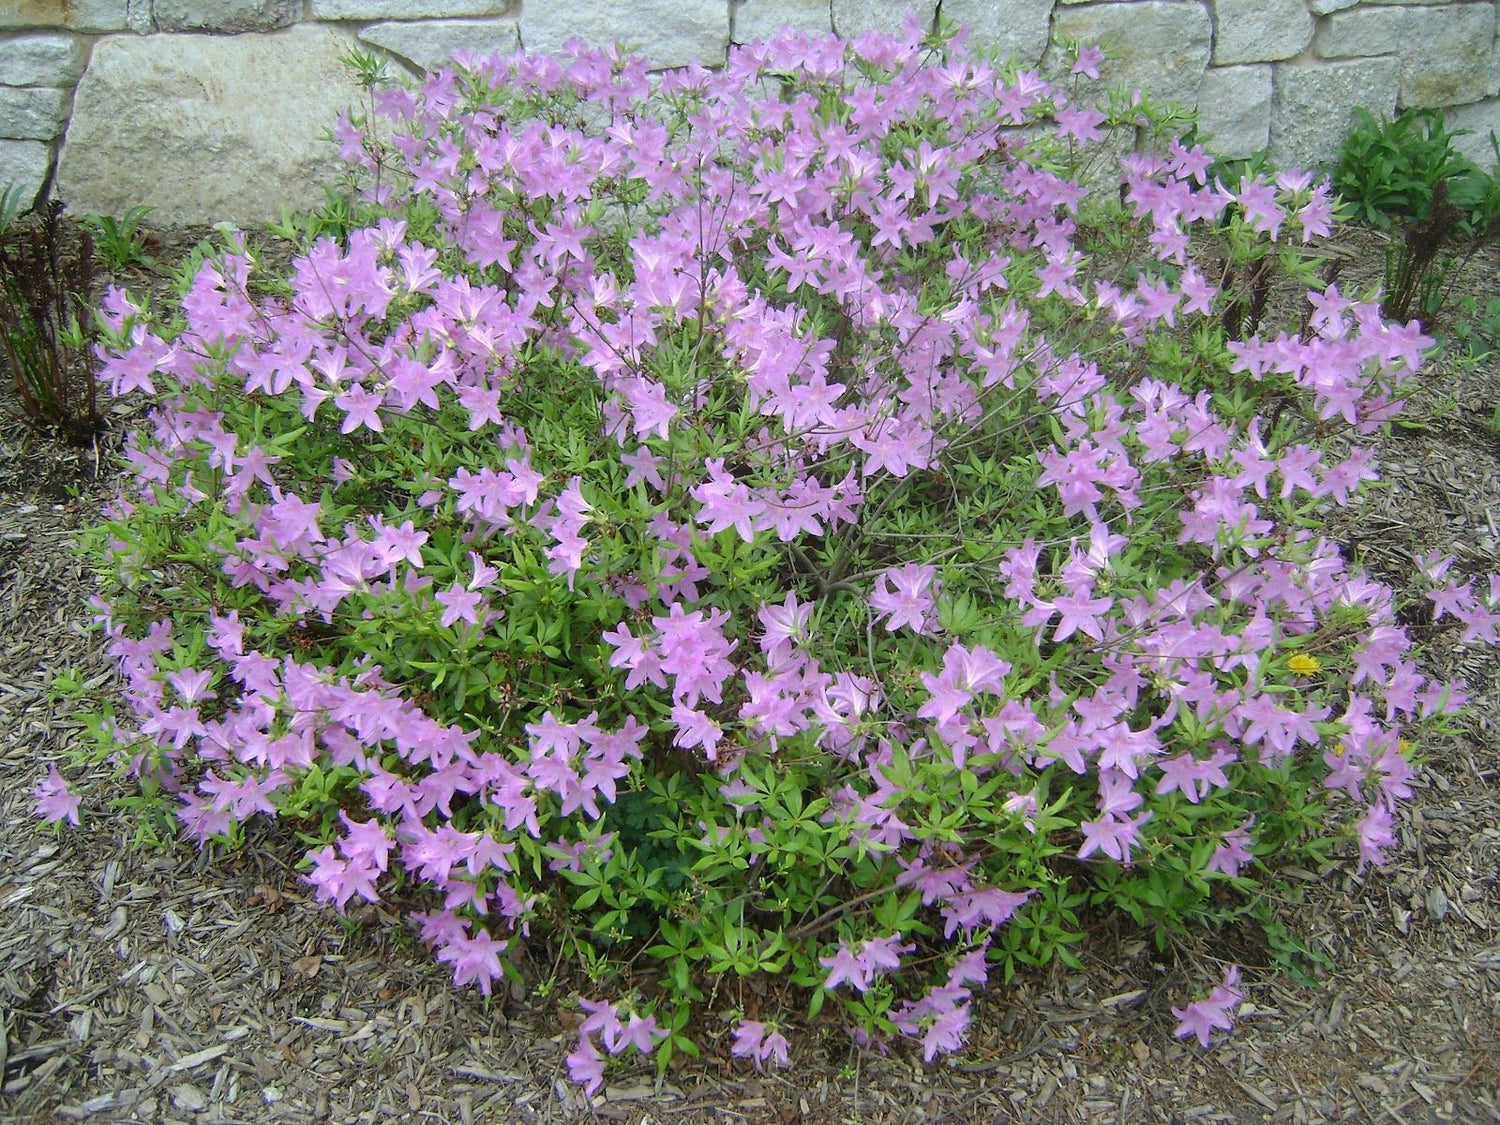 Poukhanense Azalea- a Hardy Semi-Evergreen Shrub Valued For Its Abundance of Charming Lavender-Pink Flowers In Early Spring.